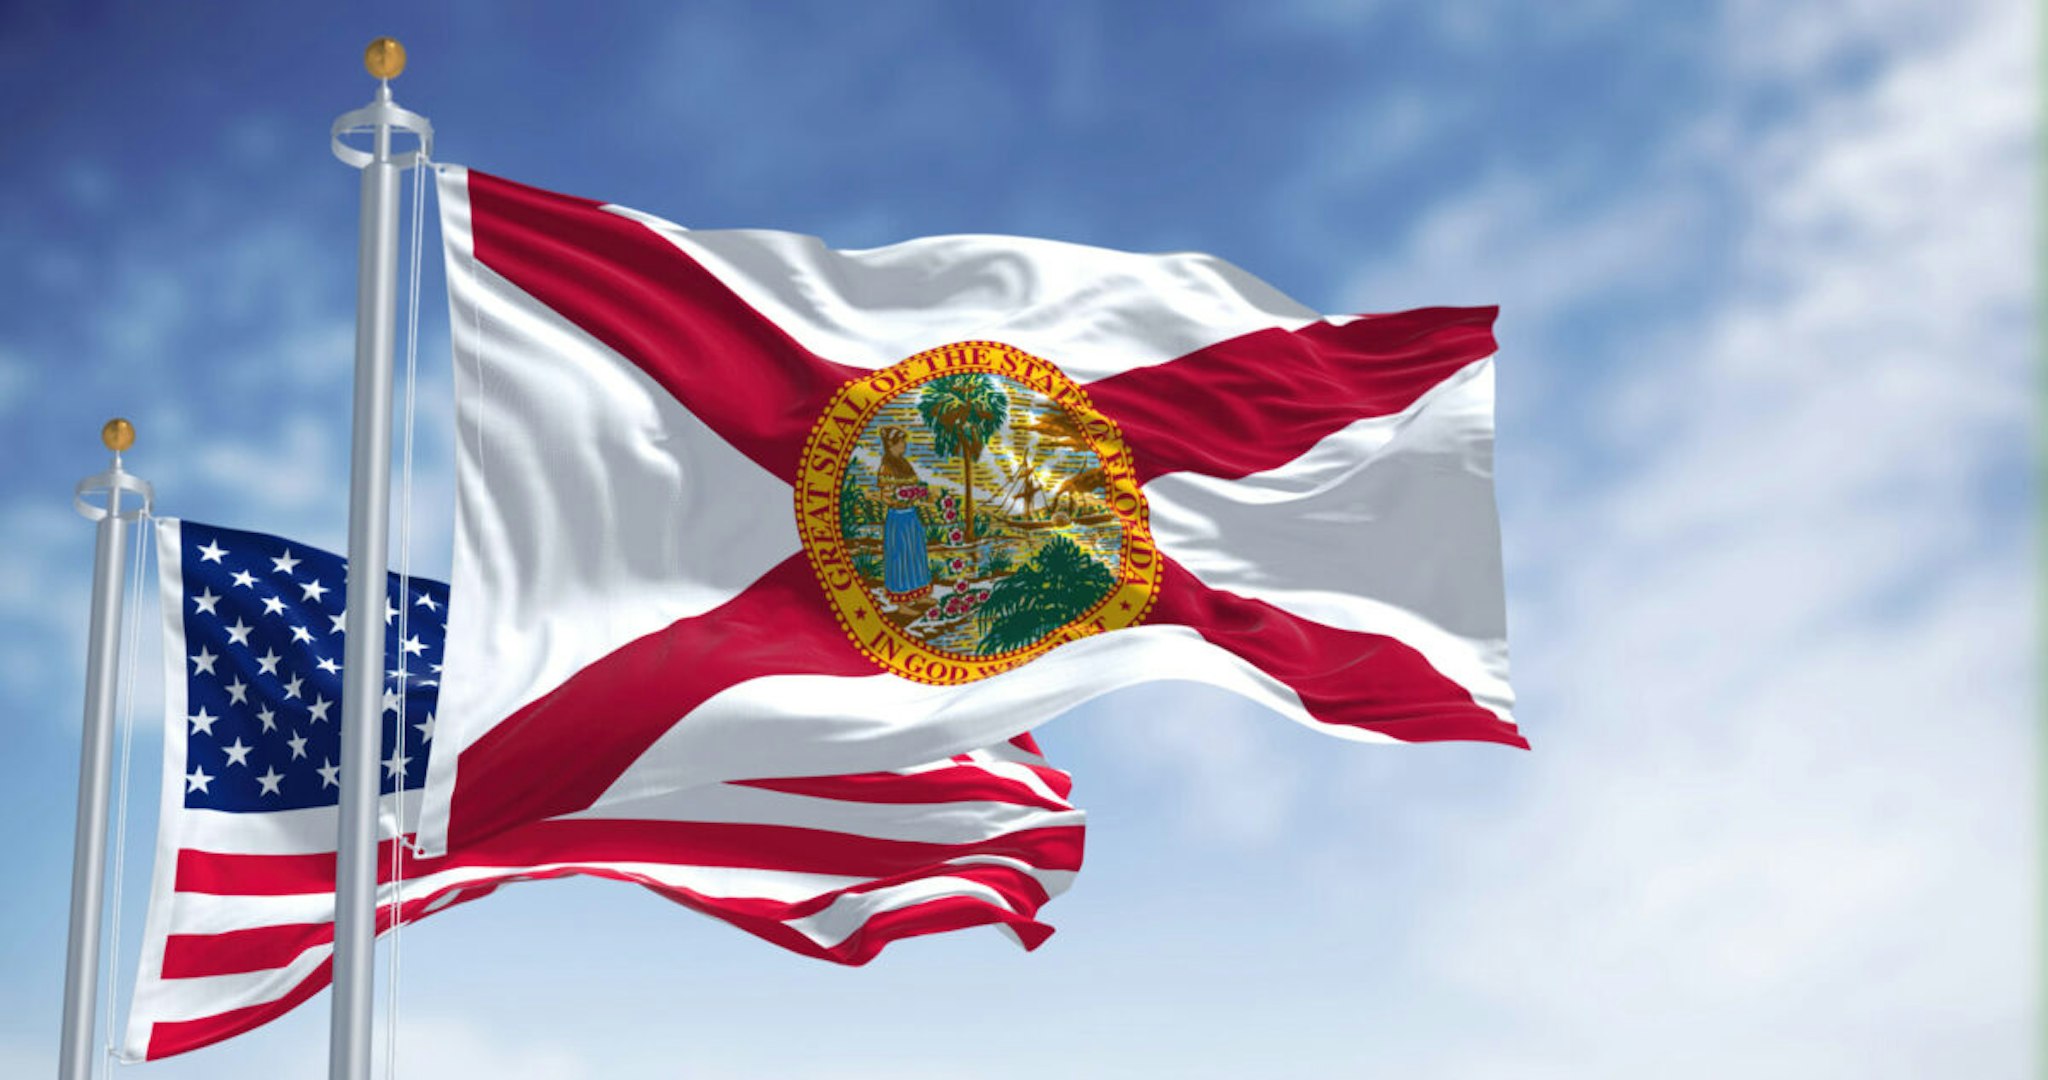 The Florida state flag waving along with the national flag of the United States of America. In the background there is a clear sky.